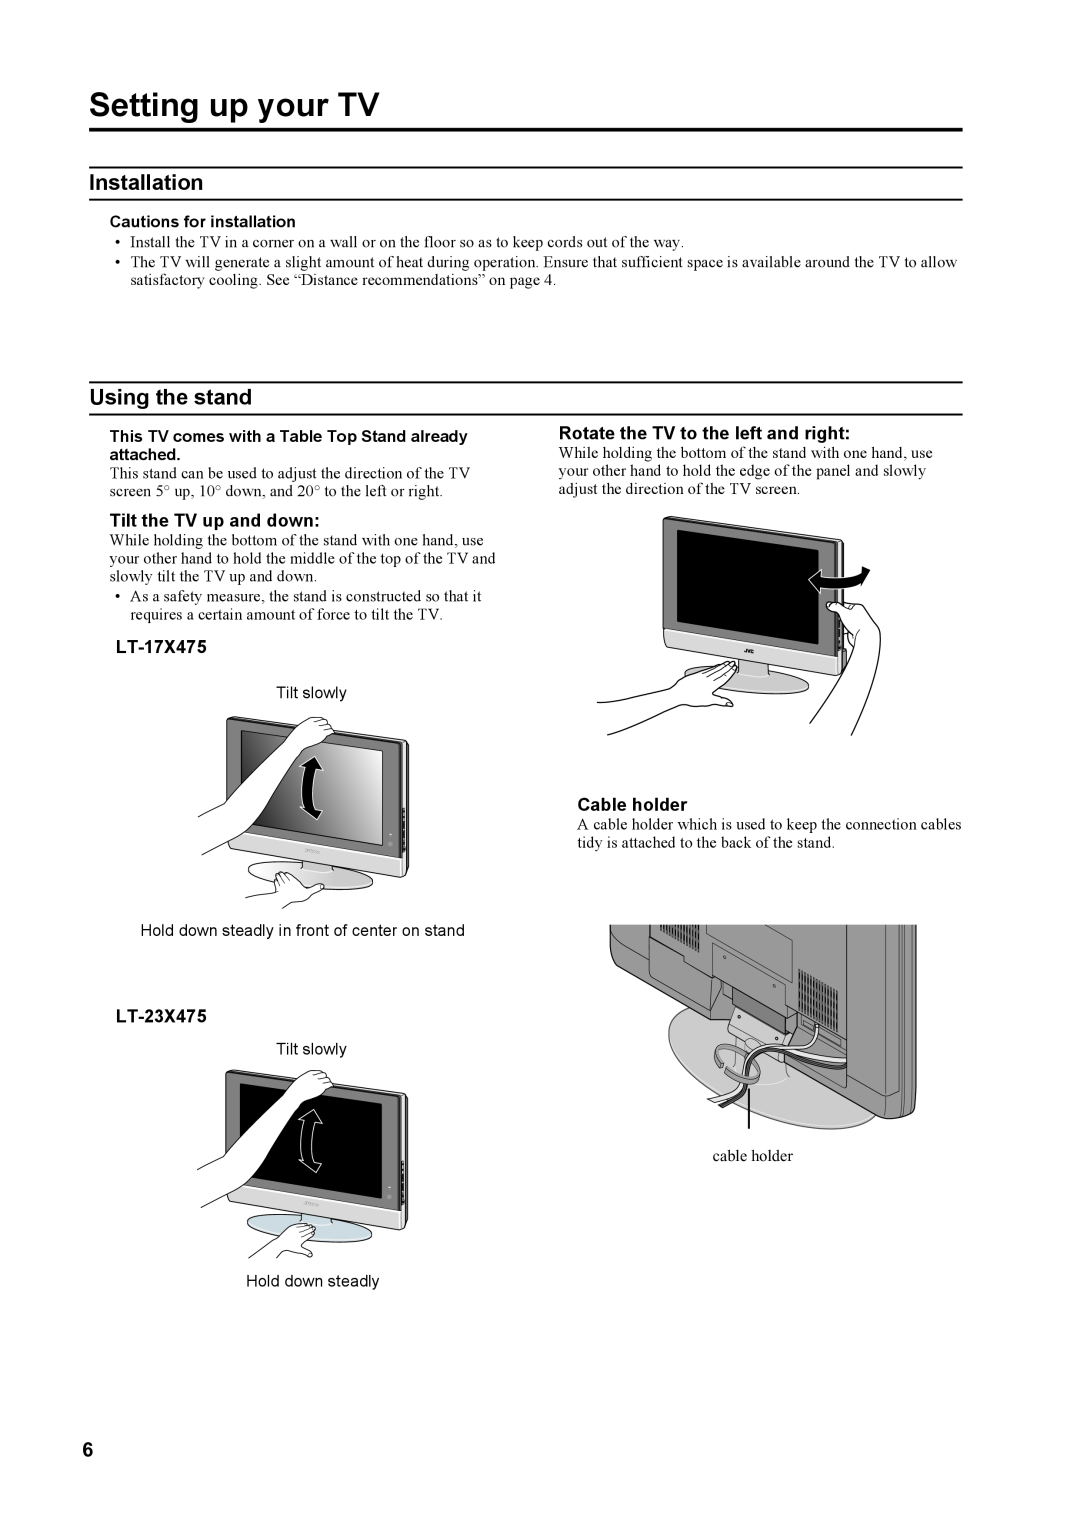 JVC LT-23X475 manual Setting up your TV, Installation, Using the stand, Rotate the TV to the left and right, LT-17X475 